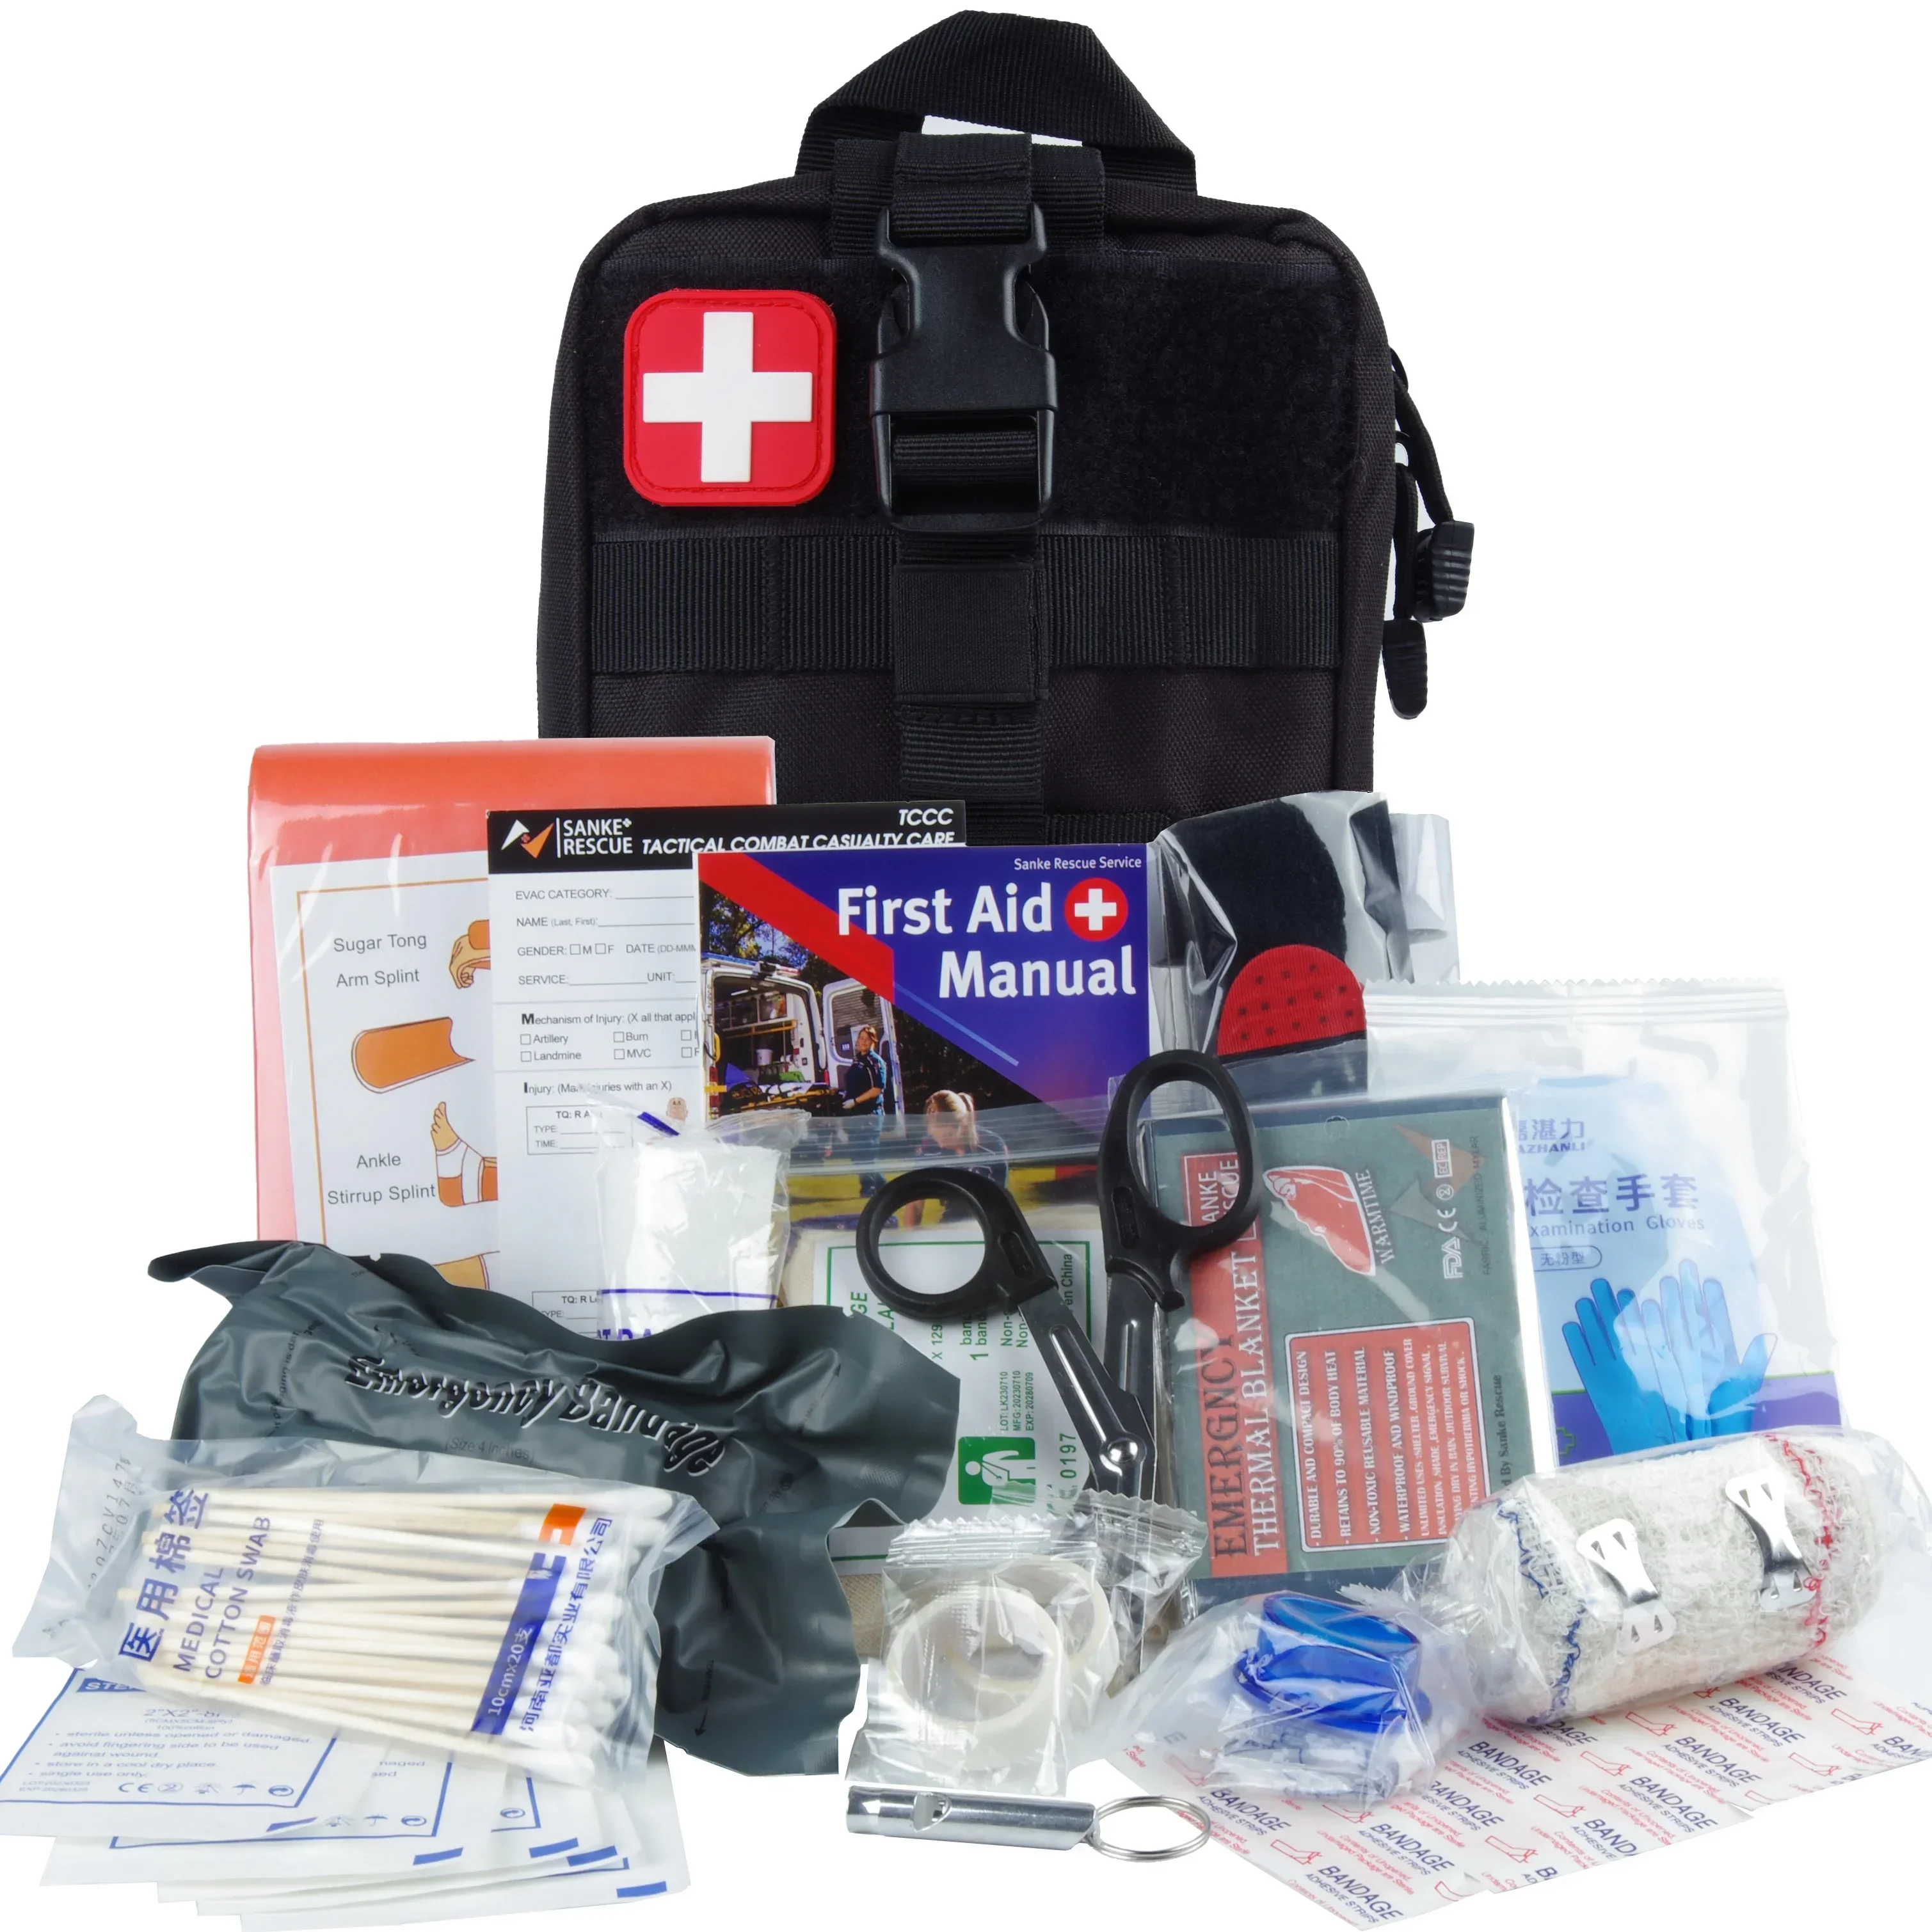 Survival First Aid Kit Survival Military Full Set Molle Outdoor Gear Emergency - £37.79 GBP